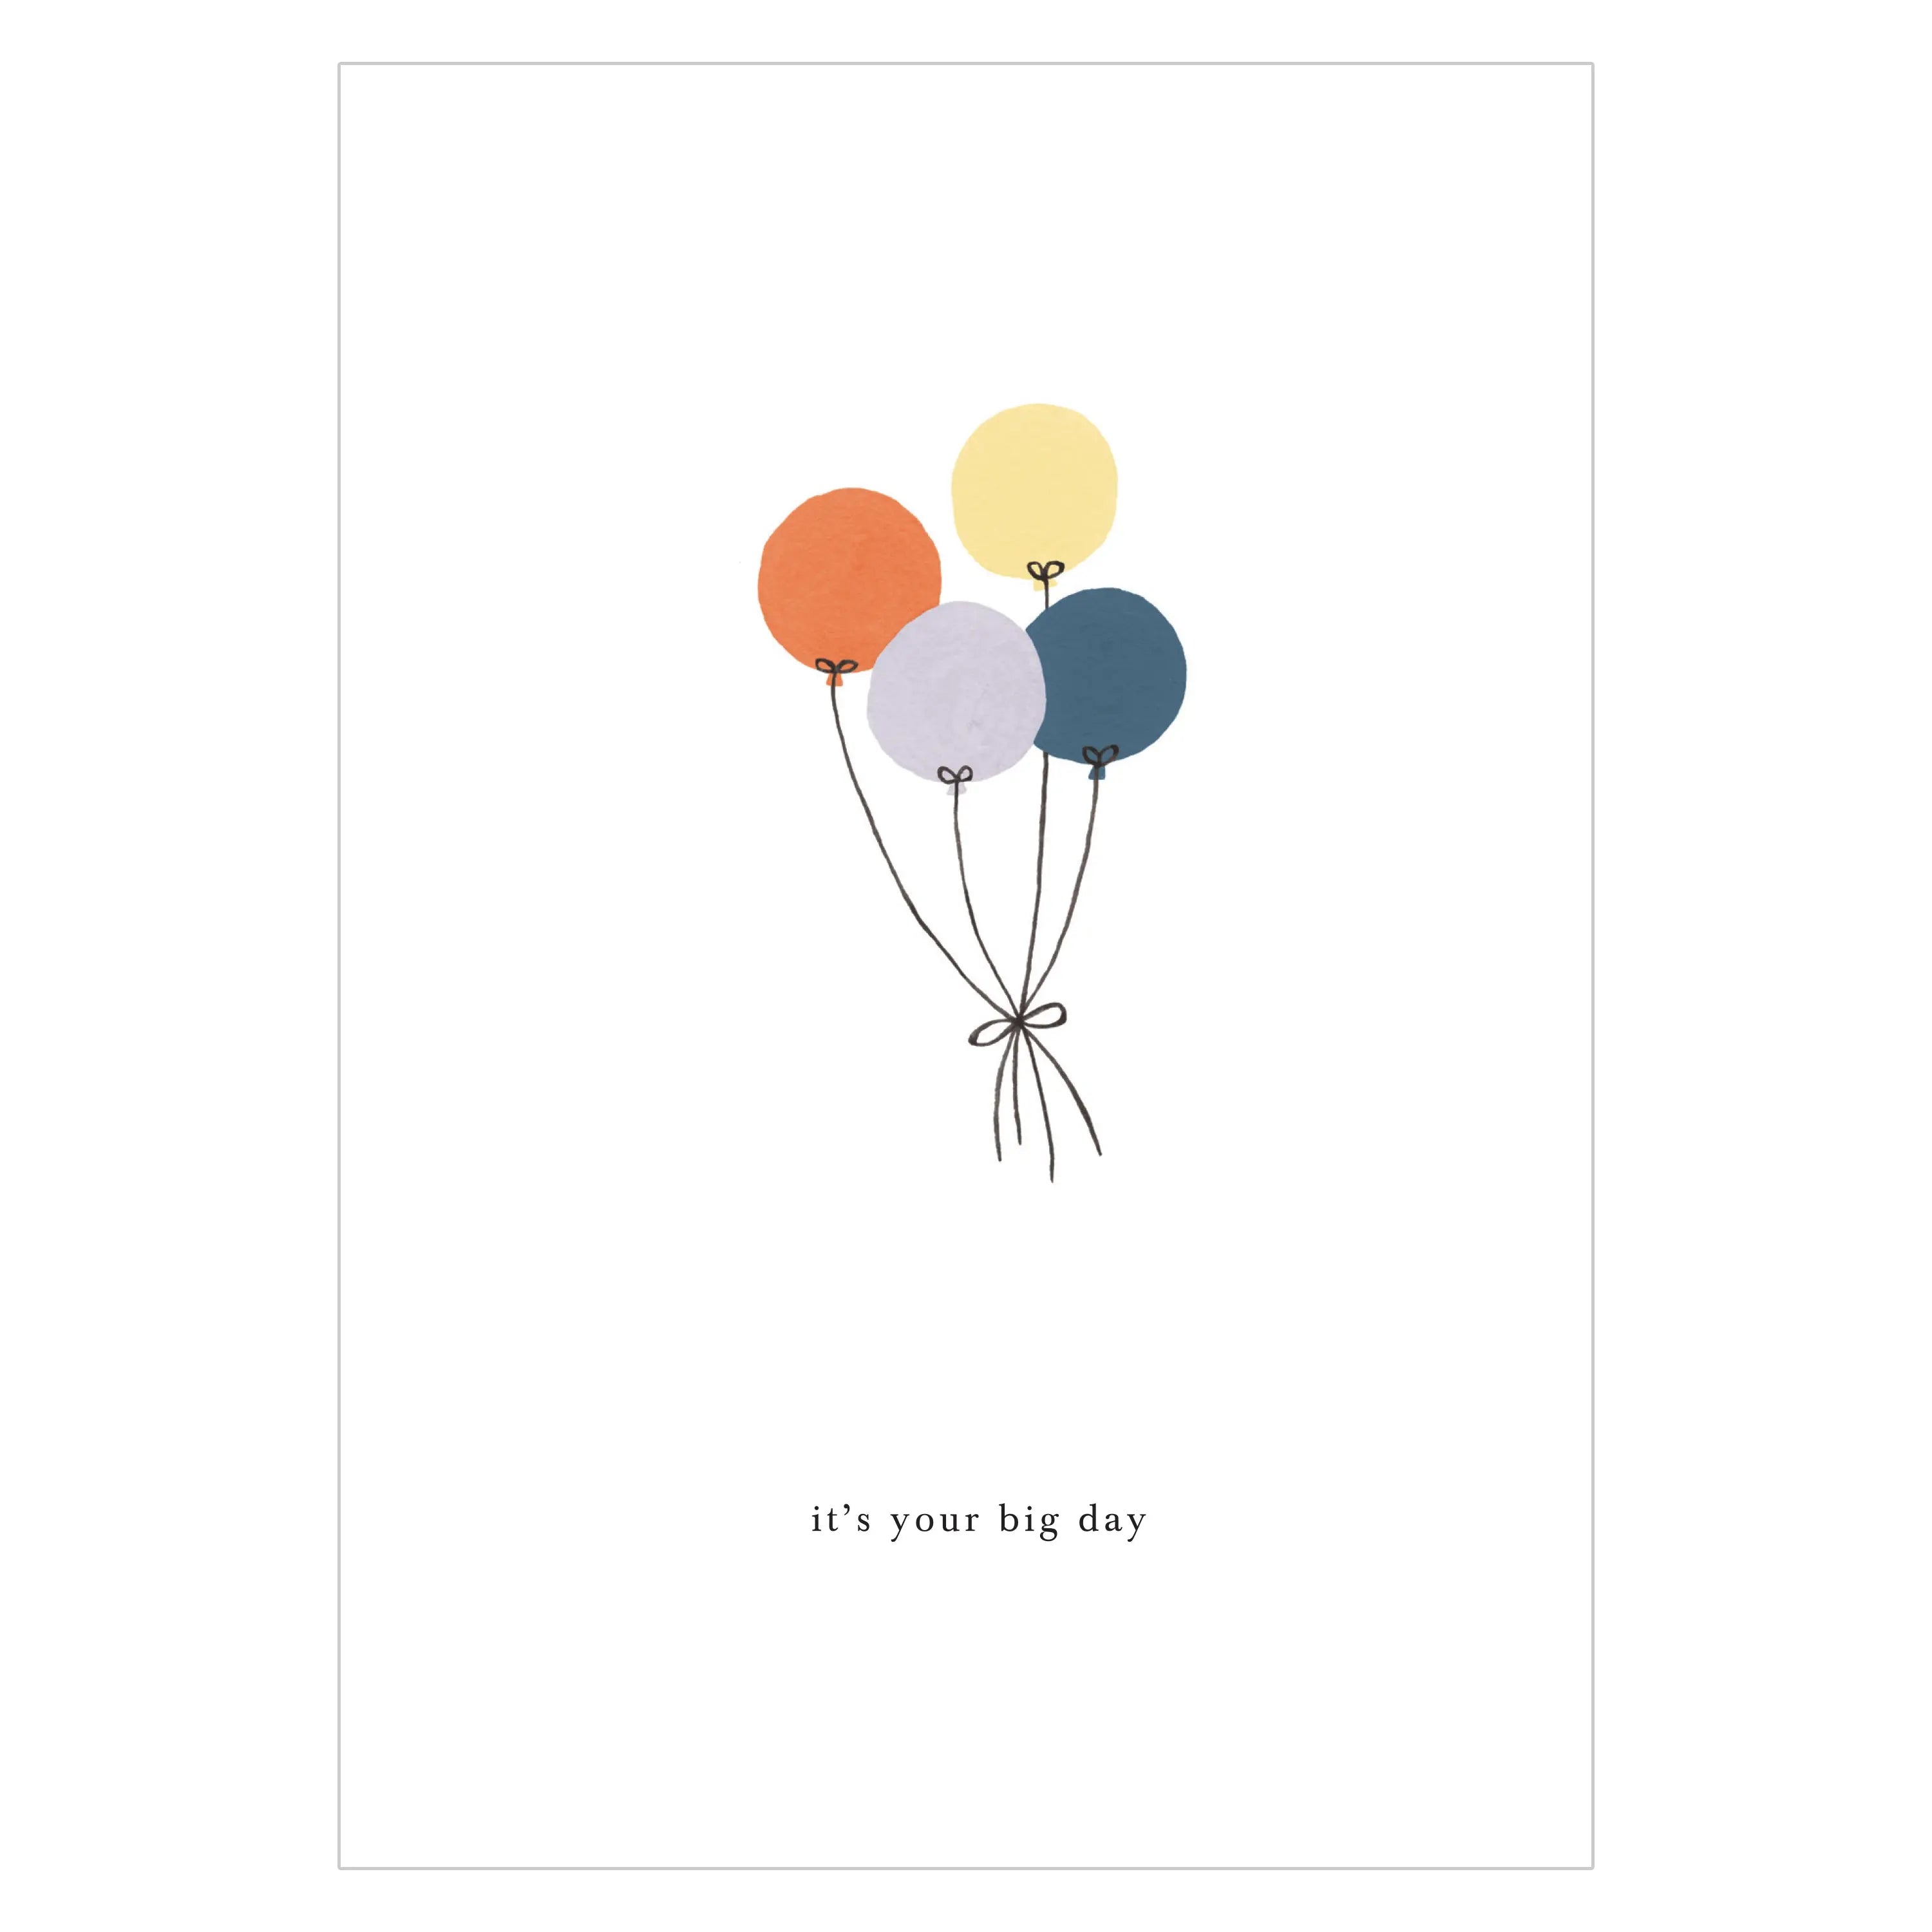 Grußkarte BALLOONS | it's your big day - Feder&Konfetti Store